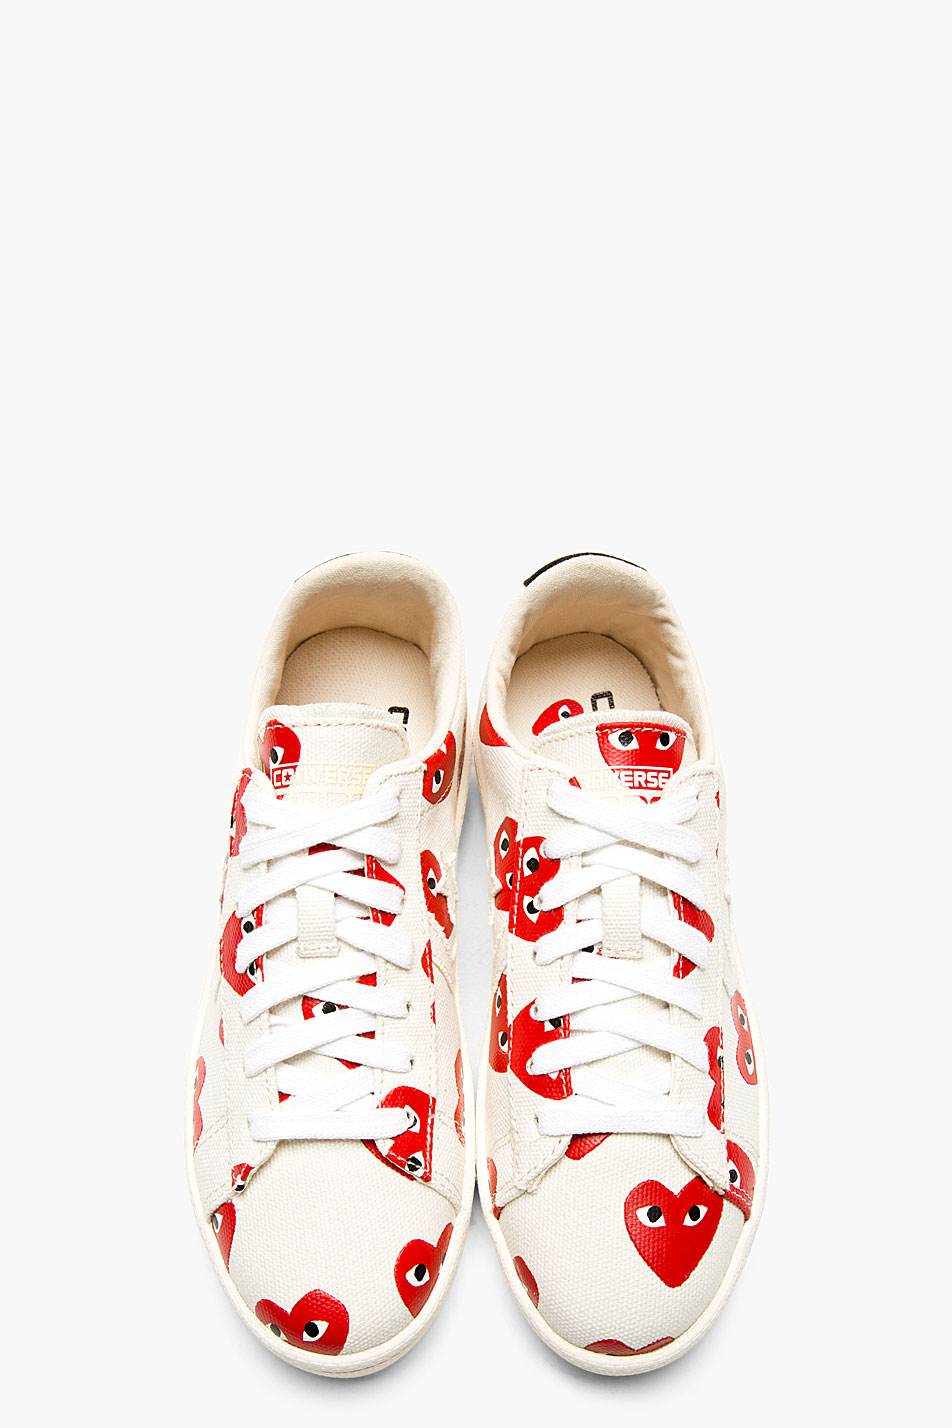 Play Comme des Garçons Heart Print Converse Cons Edition Sneakers in Red - Lyst